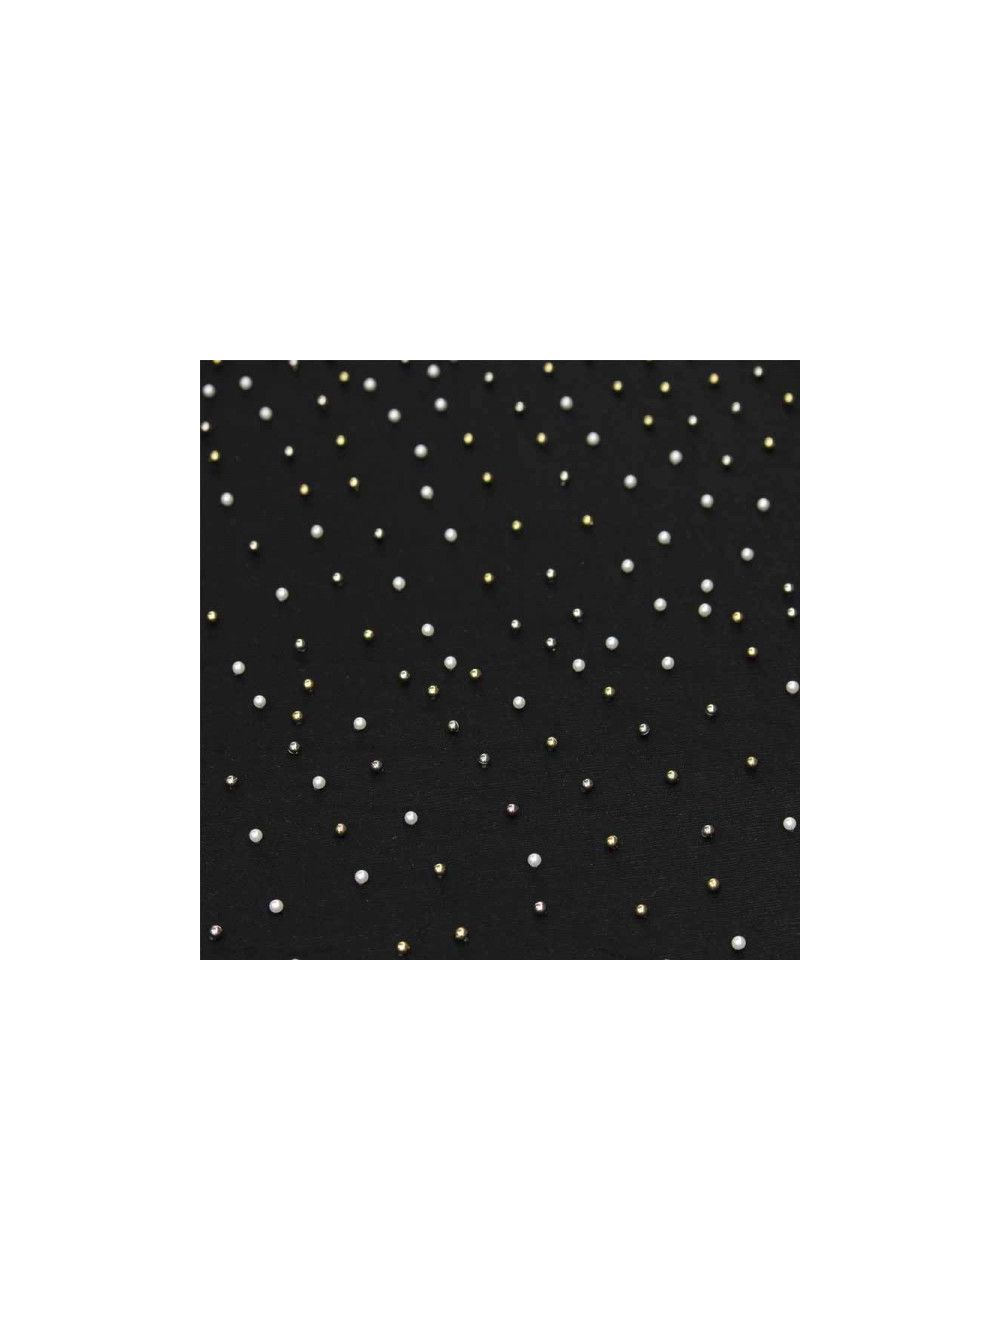 Black Net Fabric with Gold Silver White Pearls